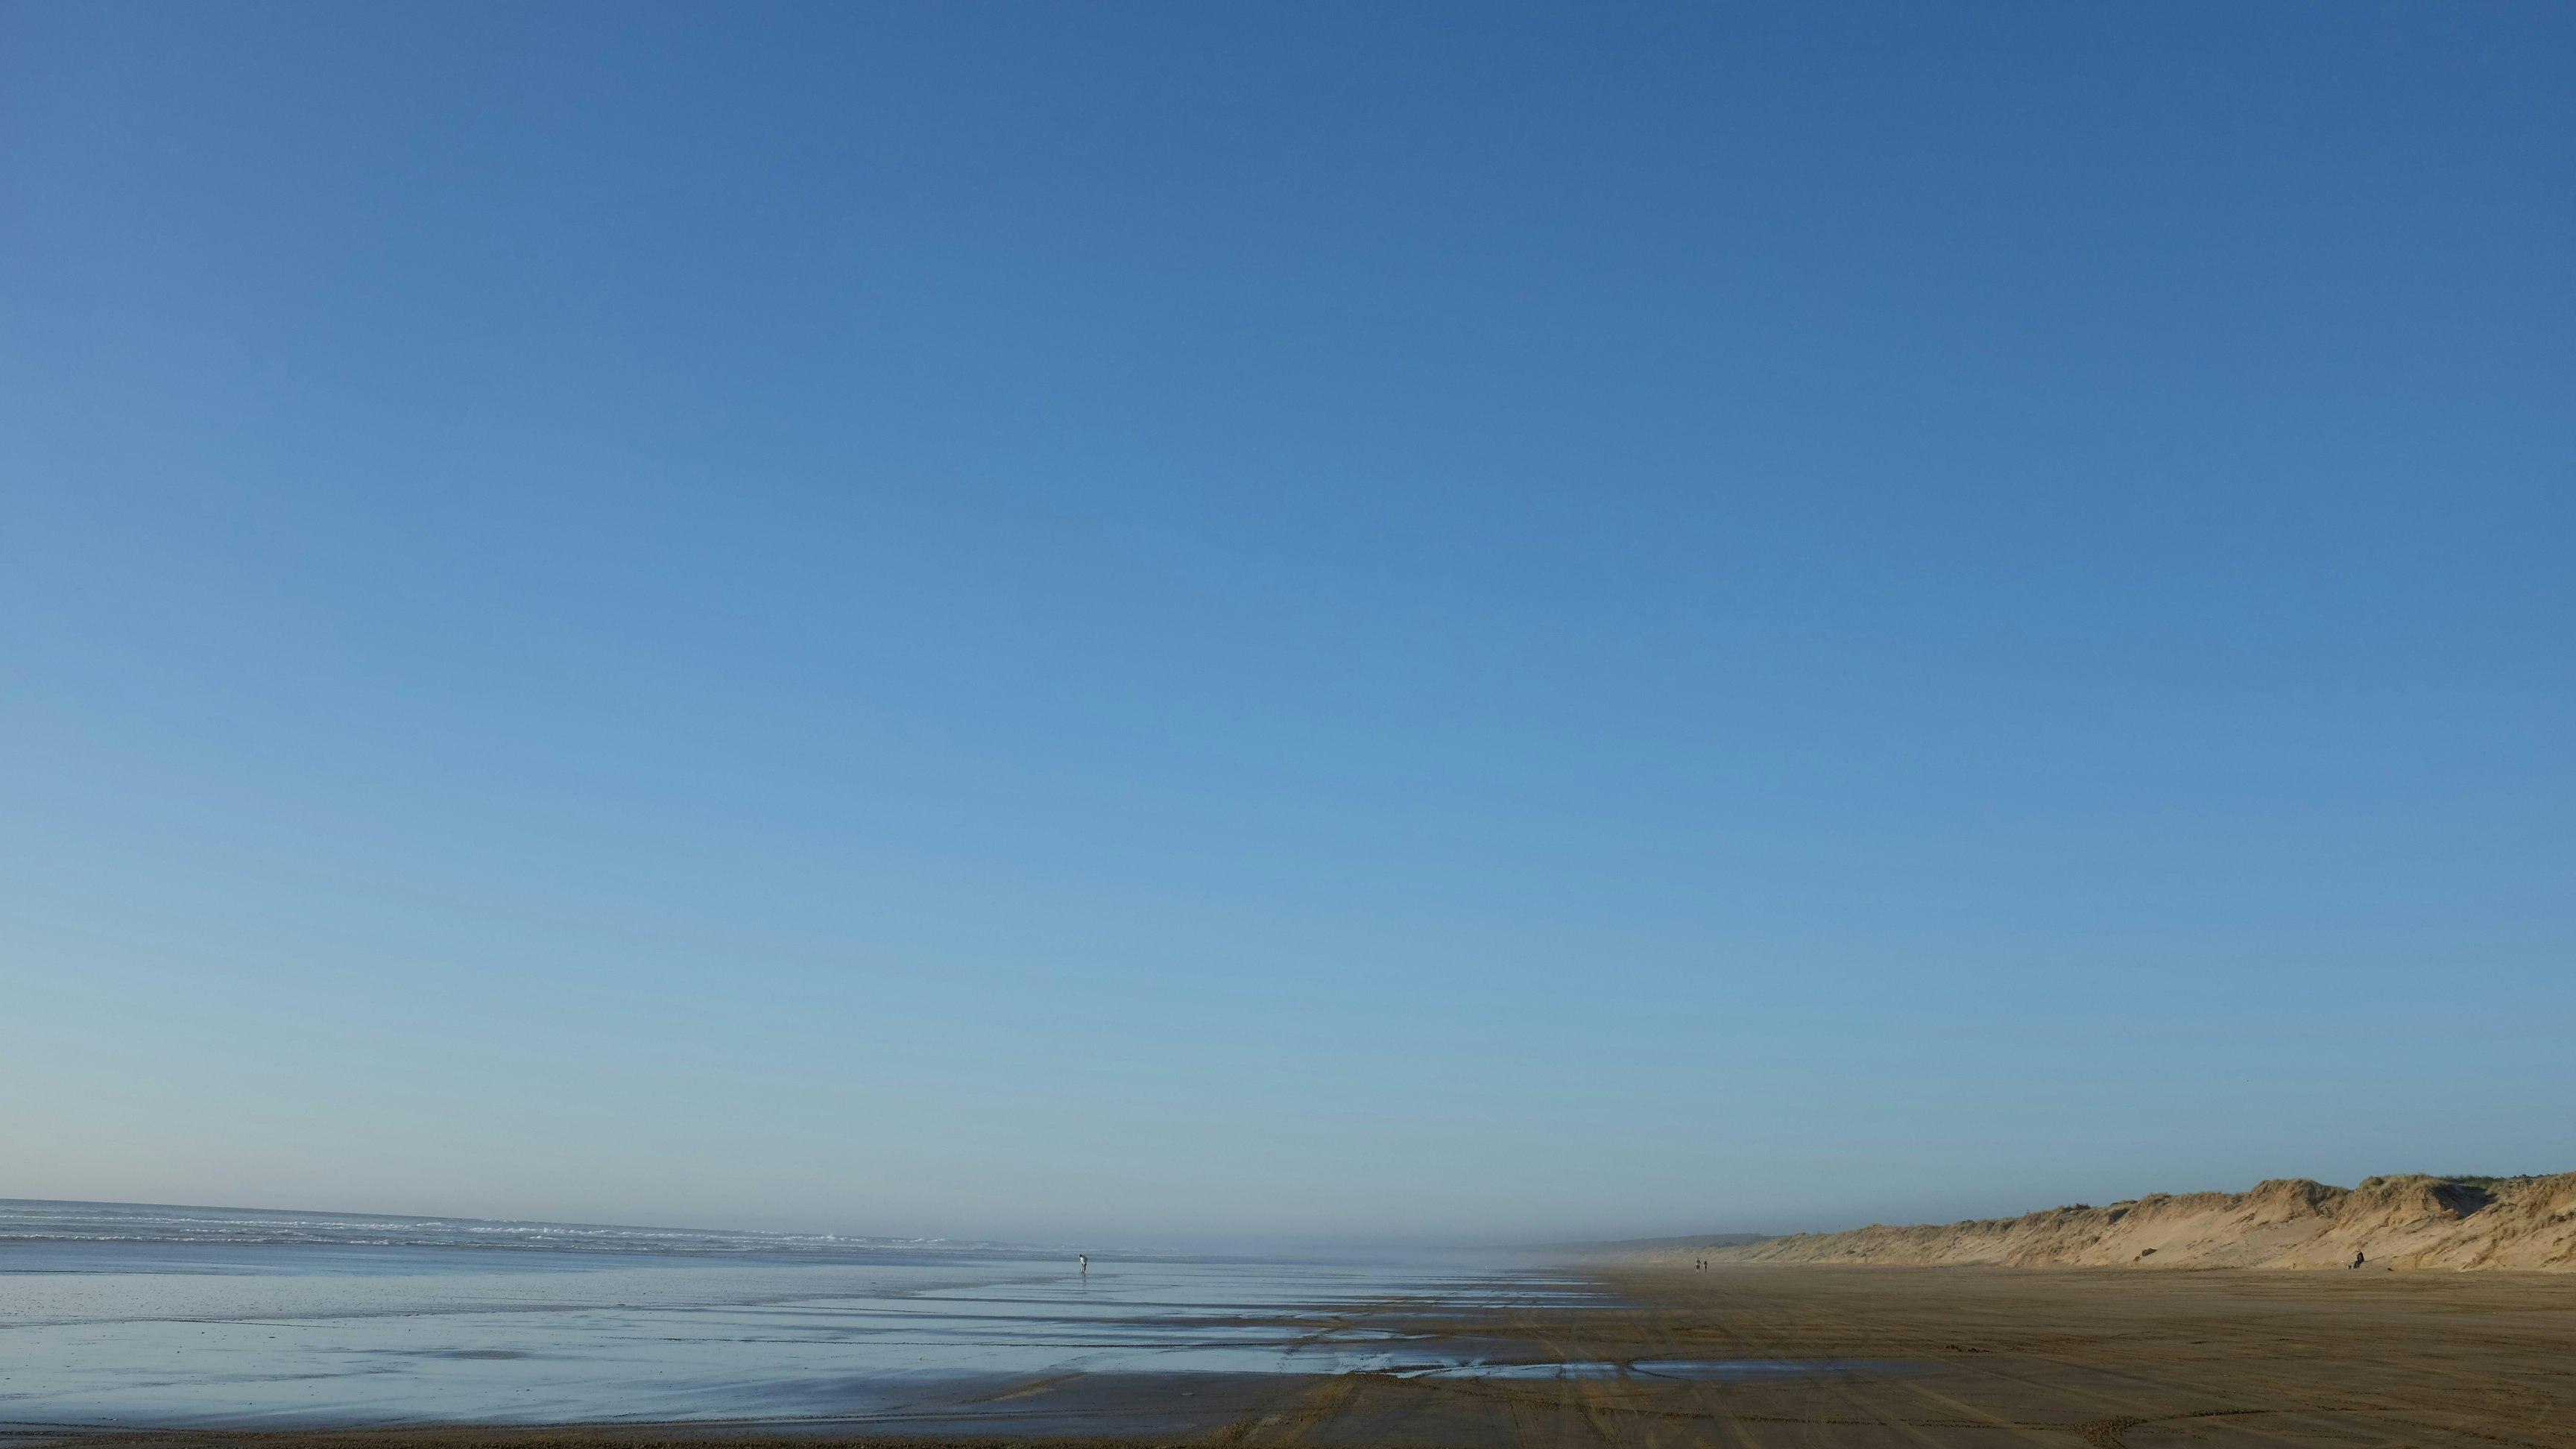 body of water and gray seashore under blue sky